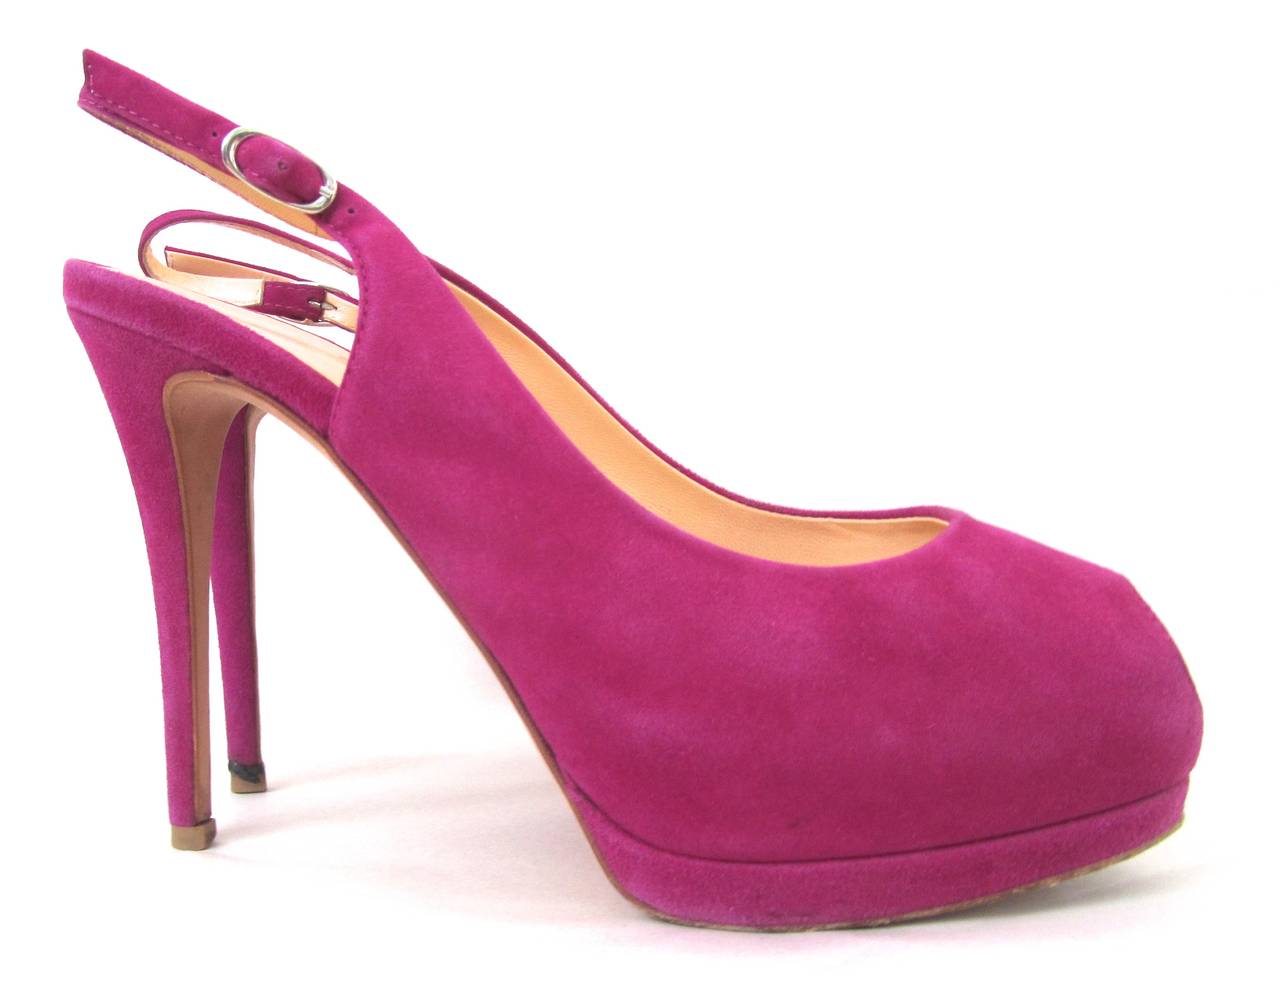 Giuseppe Zanotti pink fuchsia suede pumps with heel strap. Size 37. Toeless. Gorgeous shoes that with a timeless look. Finely crafted soft suede fabric. The heals are 4.5 inches.